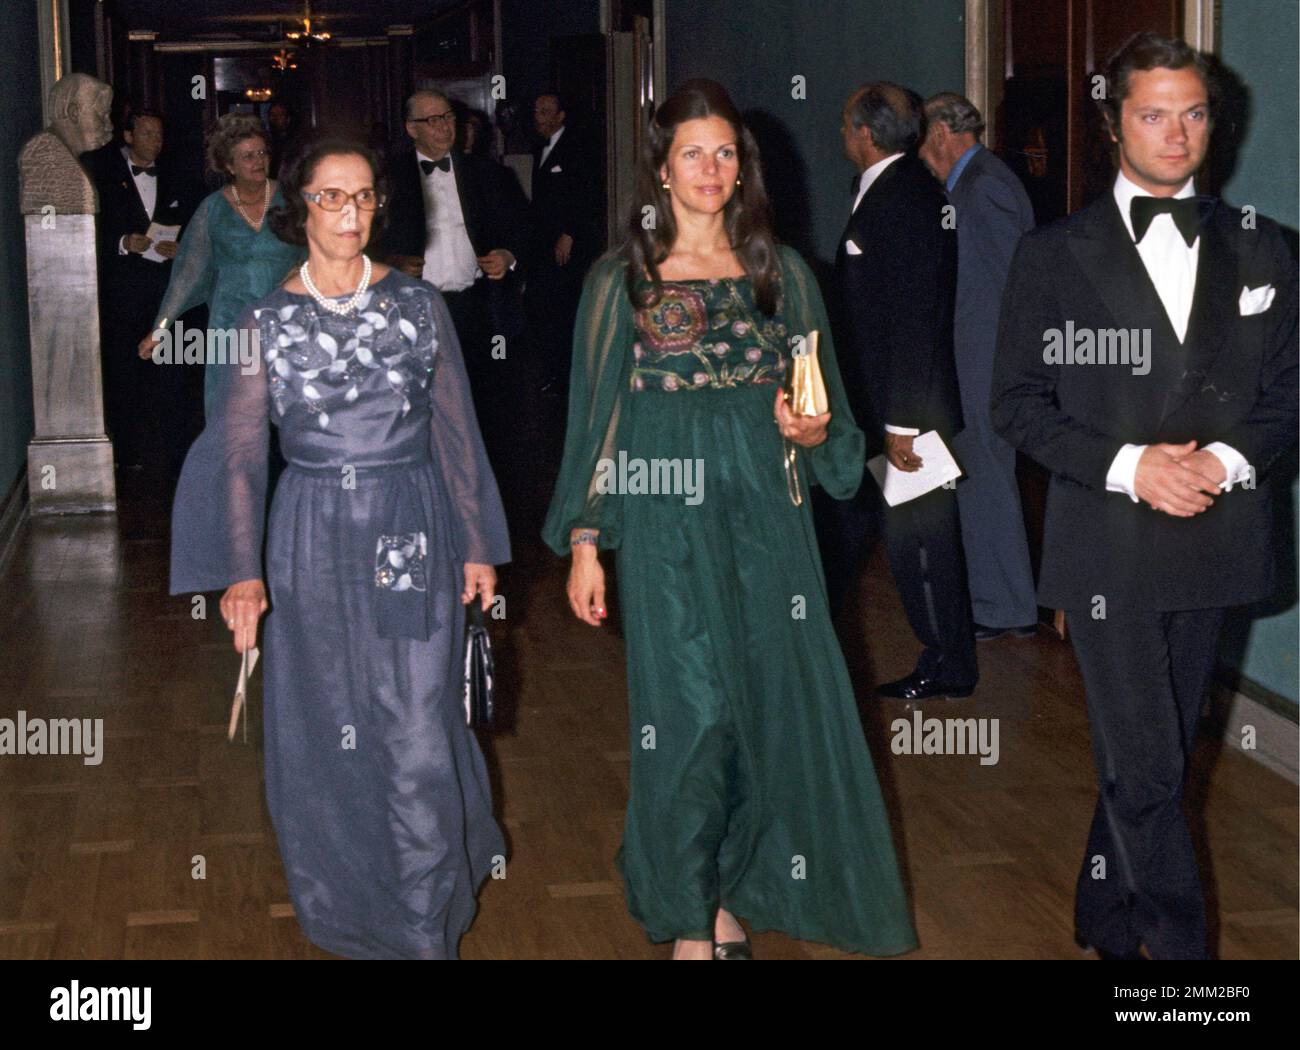 The King Carl XVI Gustaf and Queen Silvia Renate Sommerlath at a consert at the Stockholm conserthall. On the left Queen Silvias mother Alice. 1977 Stock Photo